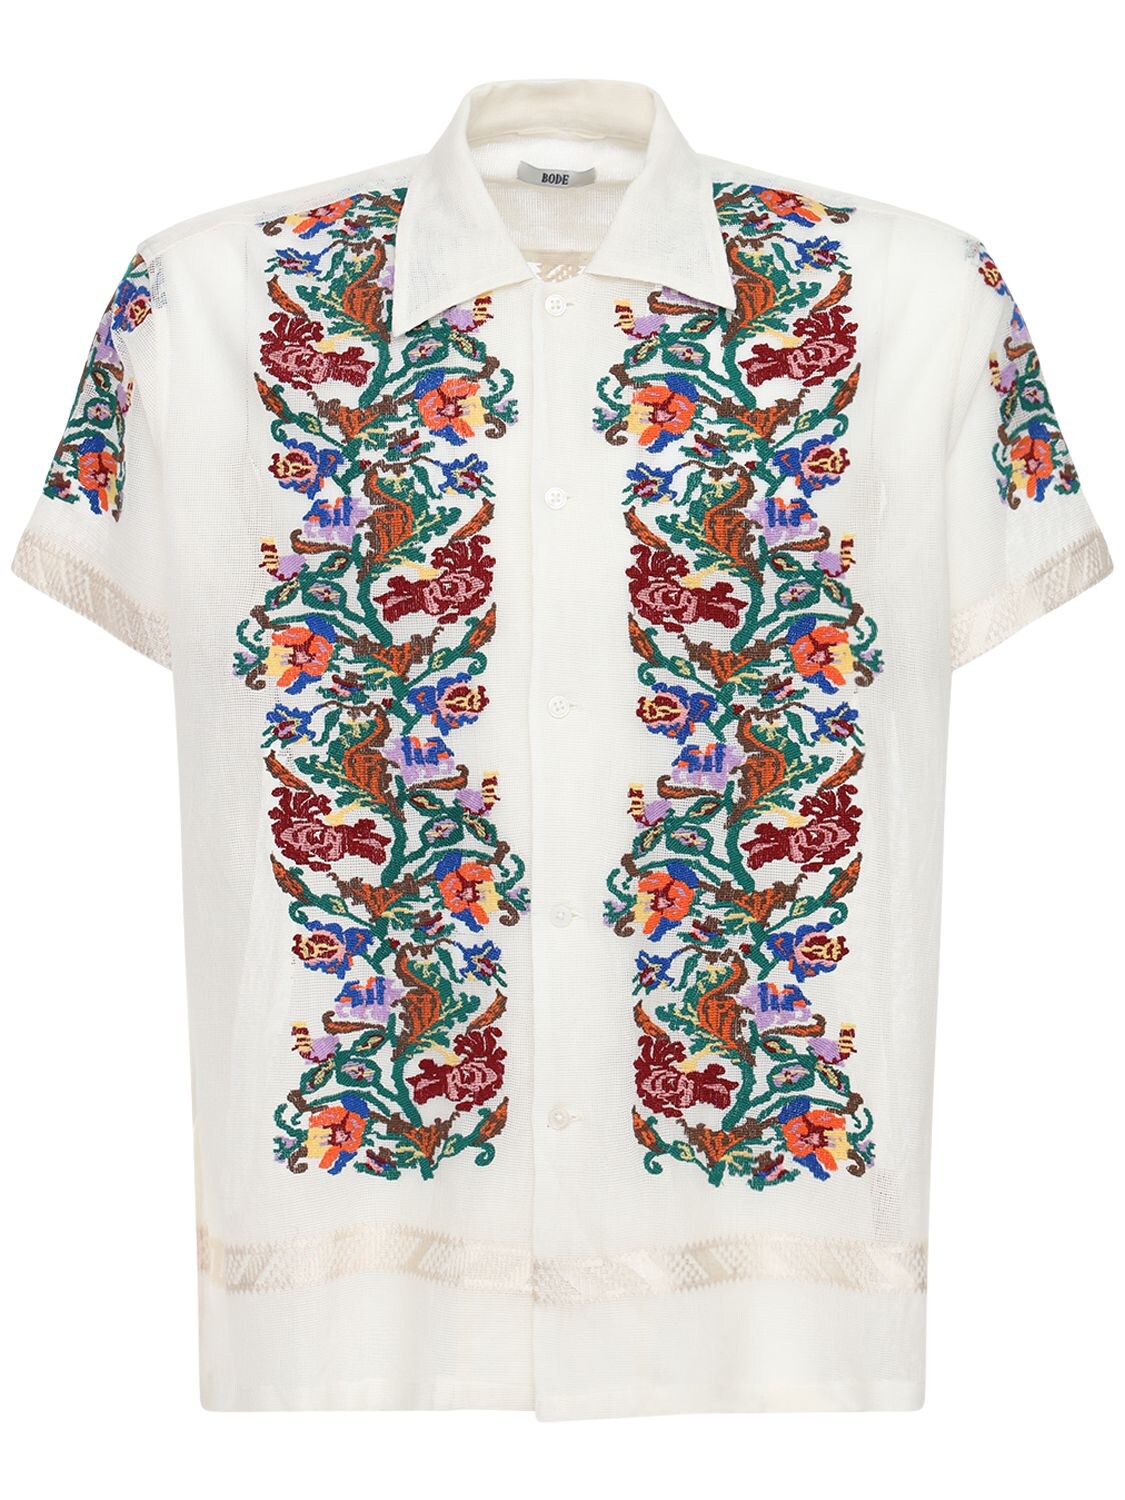 BODE LVR SUSTAINABLE FLORAL JACQUARD SHIRT,71IXC4008-MTQW0